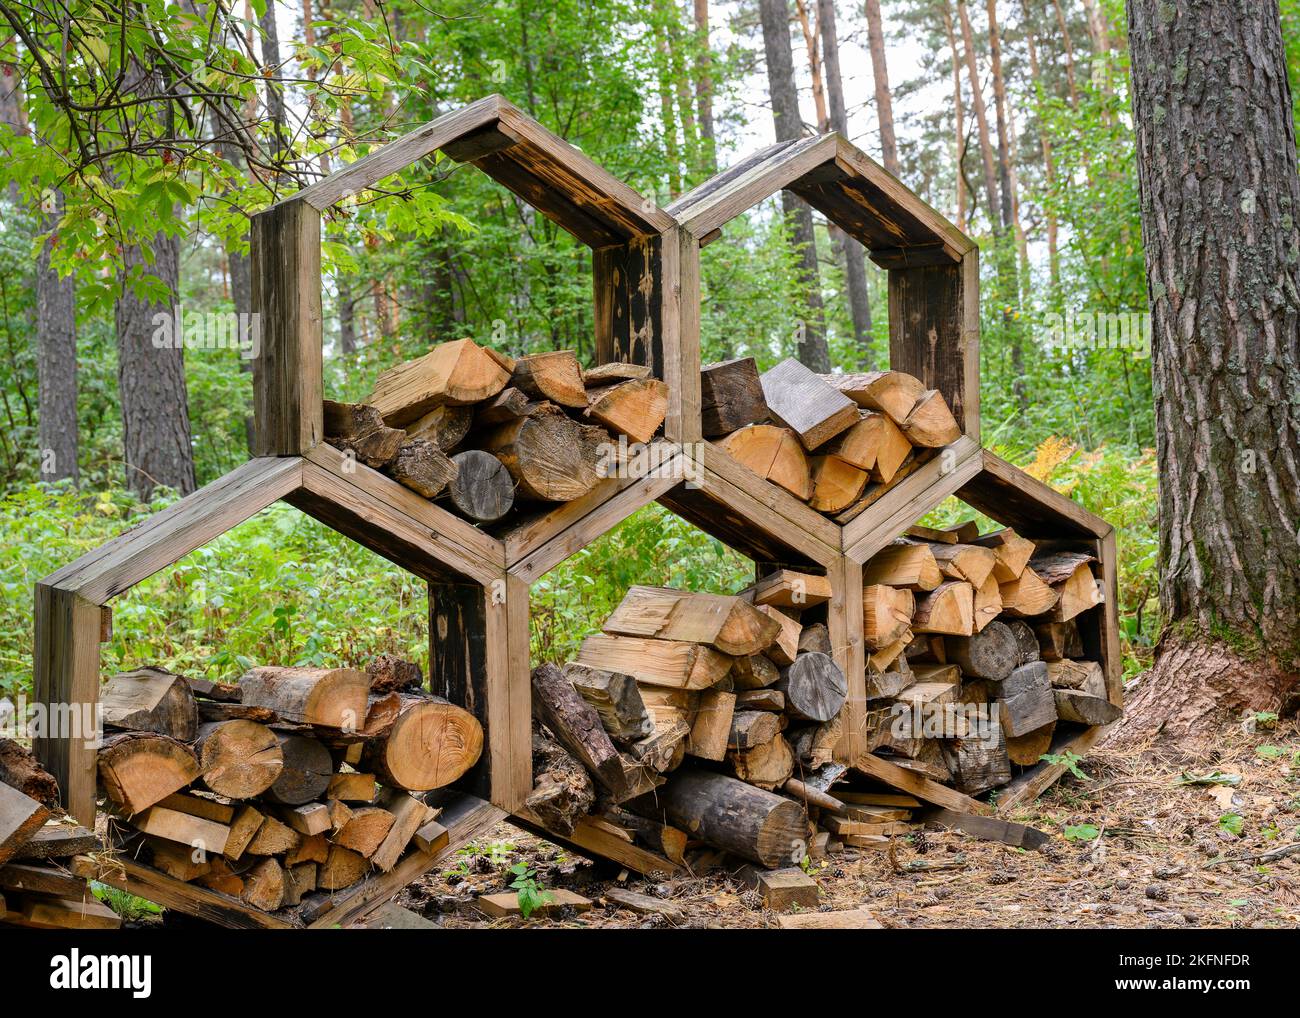 A woodpile of firewood in a clearing among trees in autumn Stock Photo